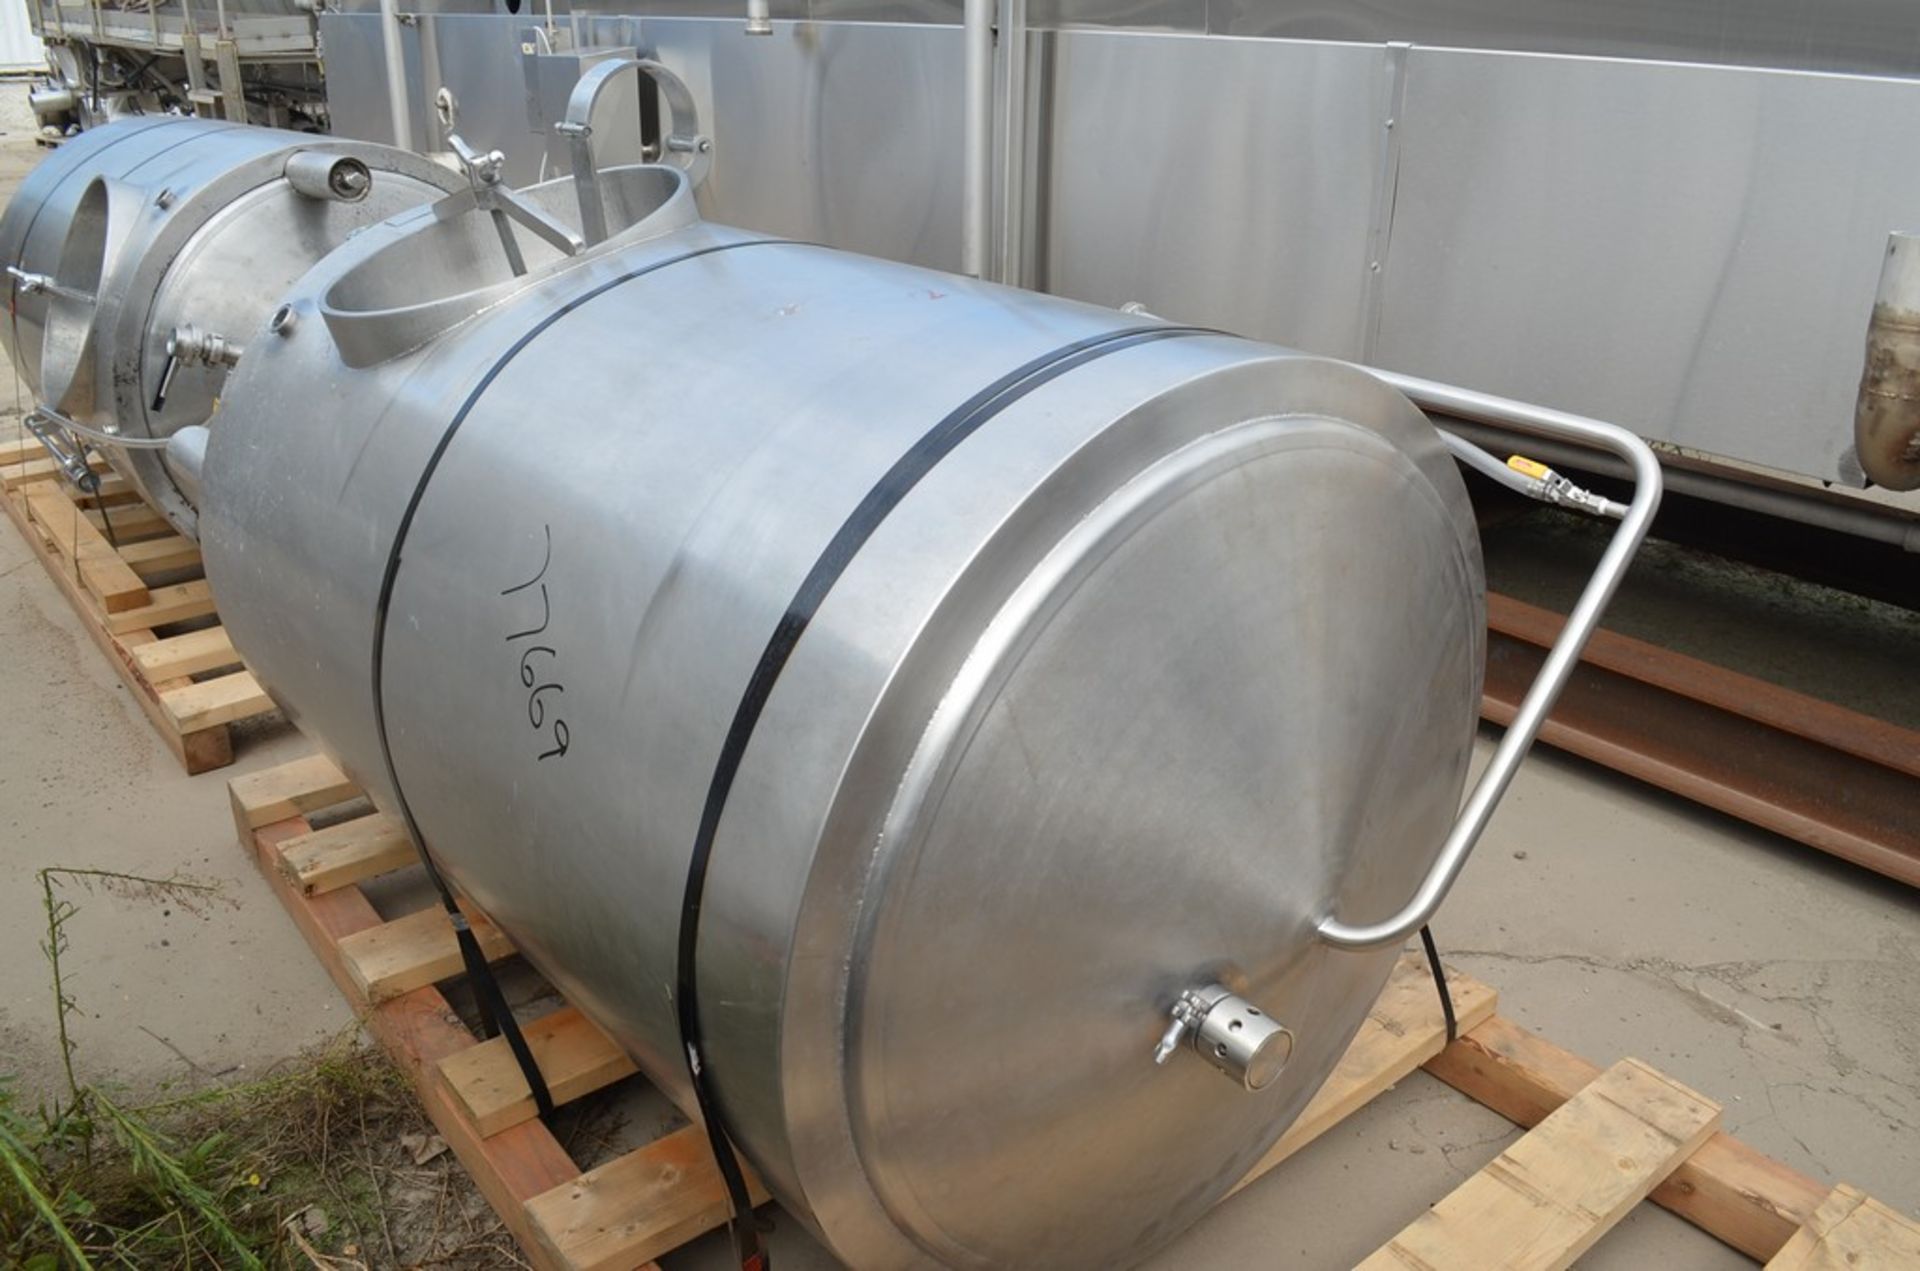 8.5 BBL (1,000 Liter/265 Gallons) Cote Manufacturing Vertical S/S Jacketed Brite Tank. Dome Top,